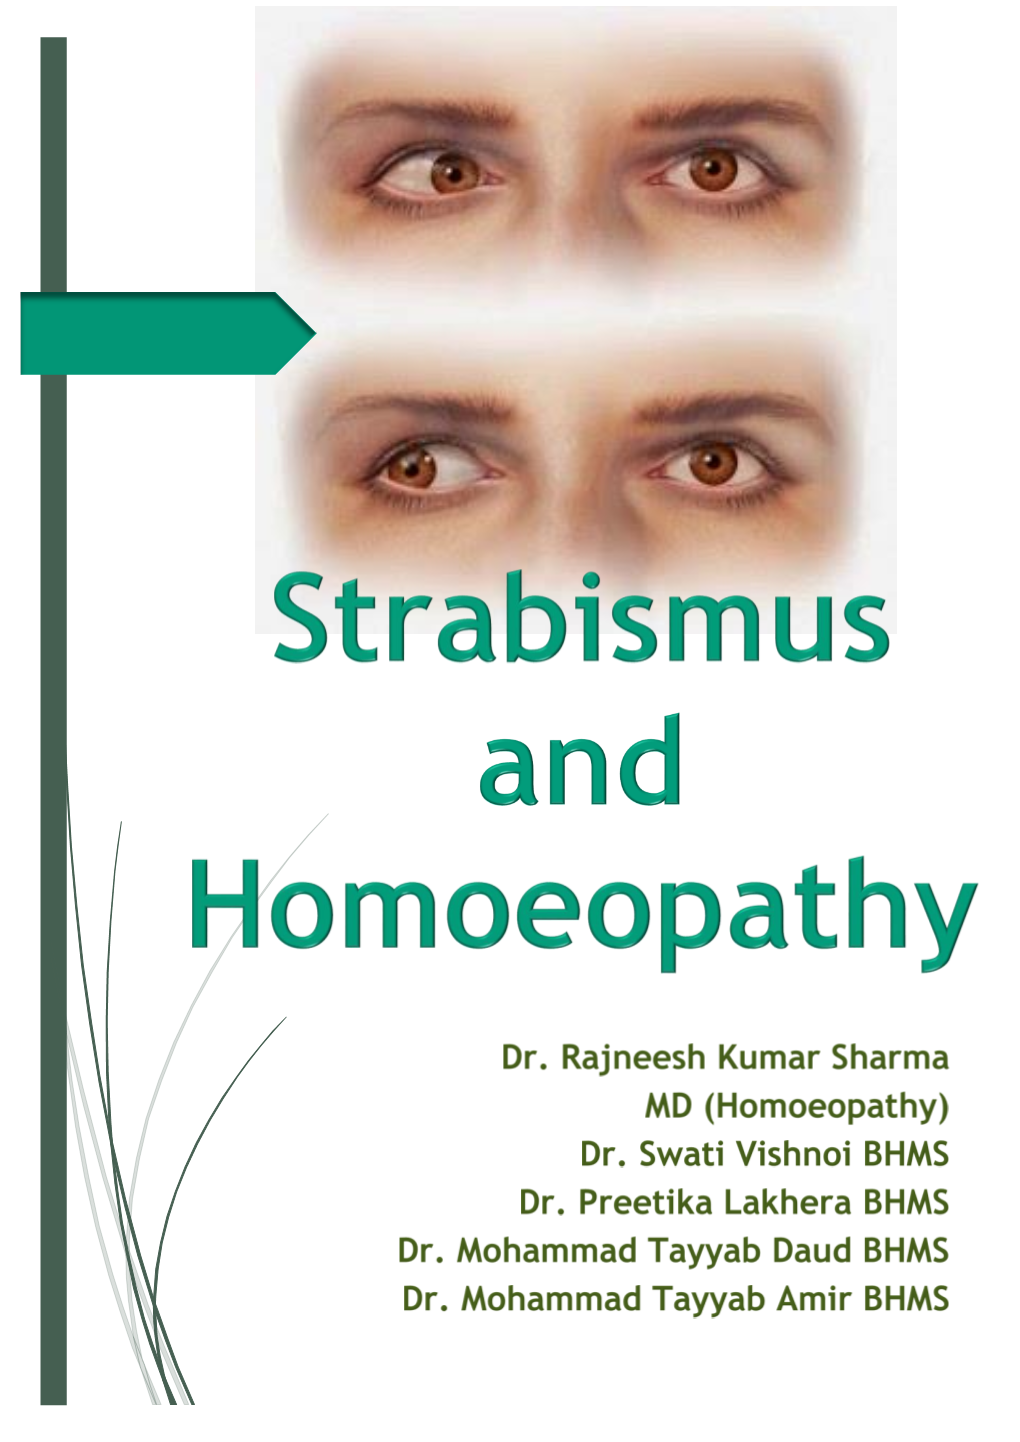 Strabismus and Homoeopathy STRABISMUS and HOMOEOPATHY Dr